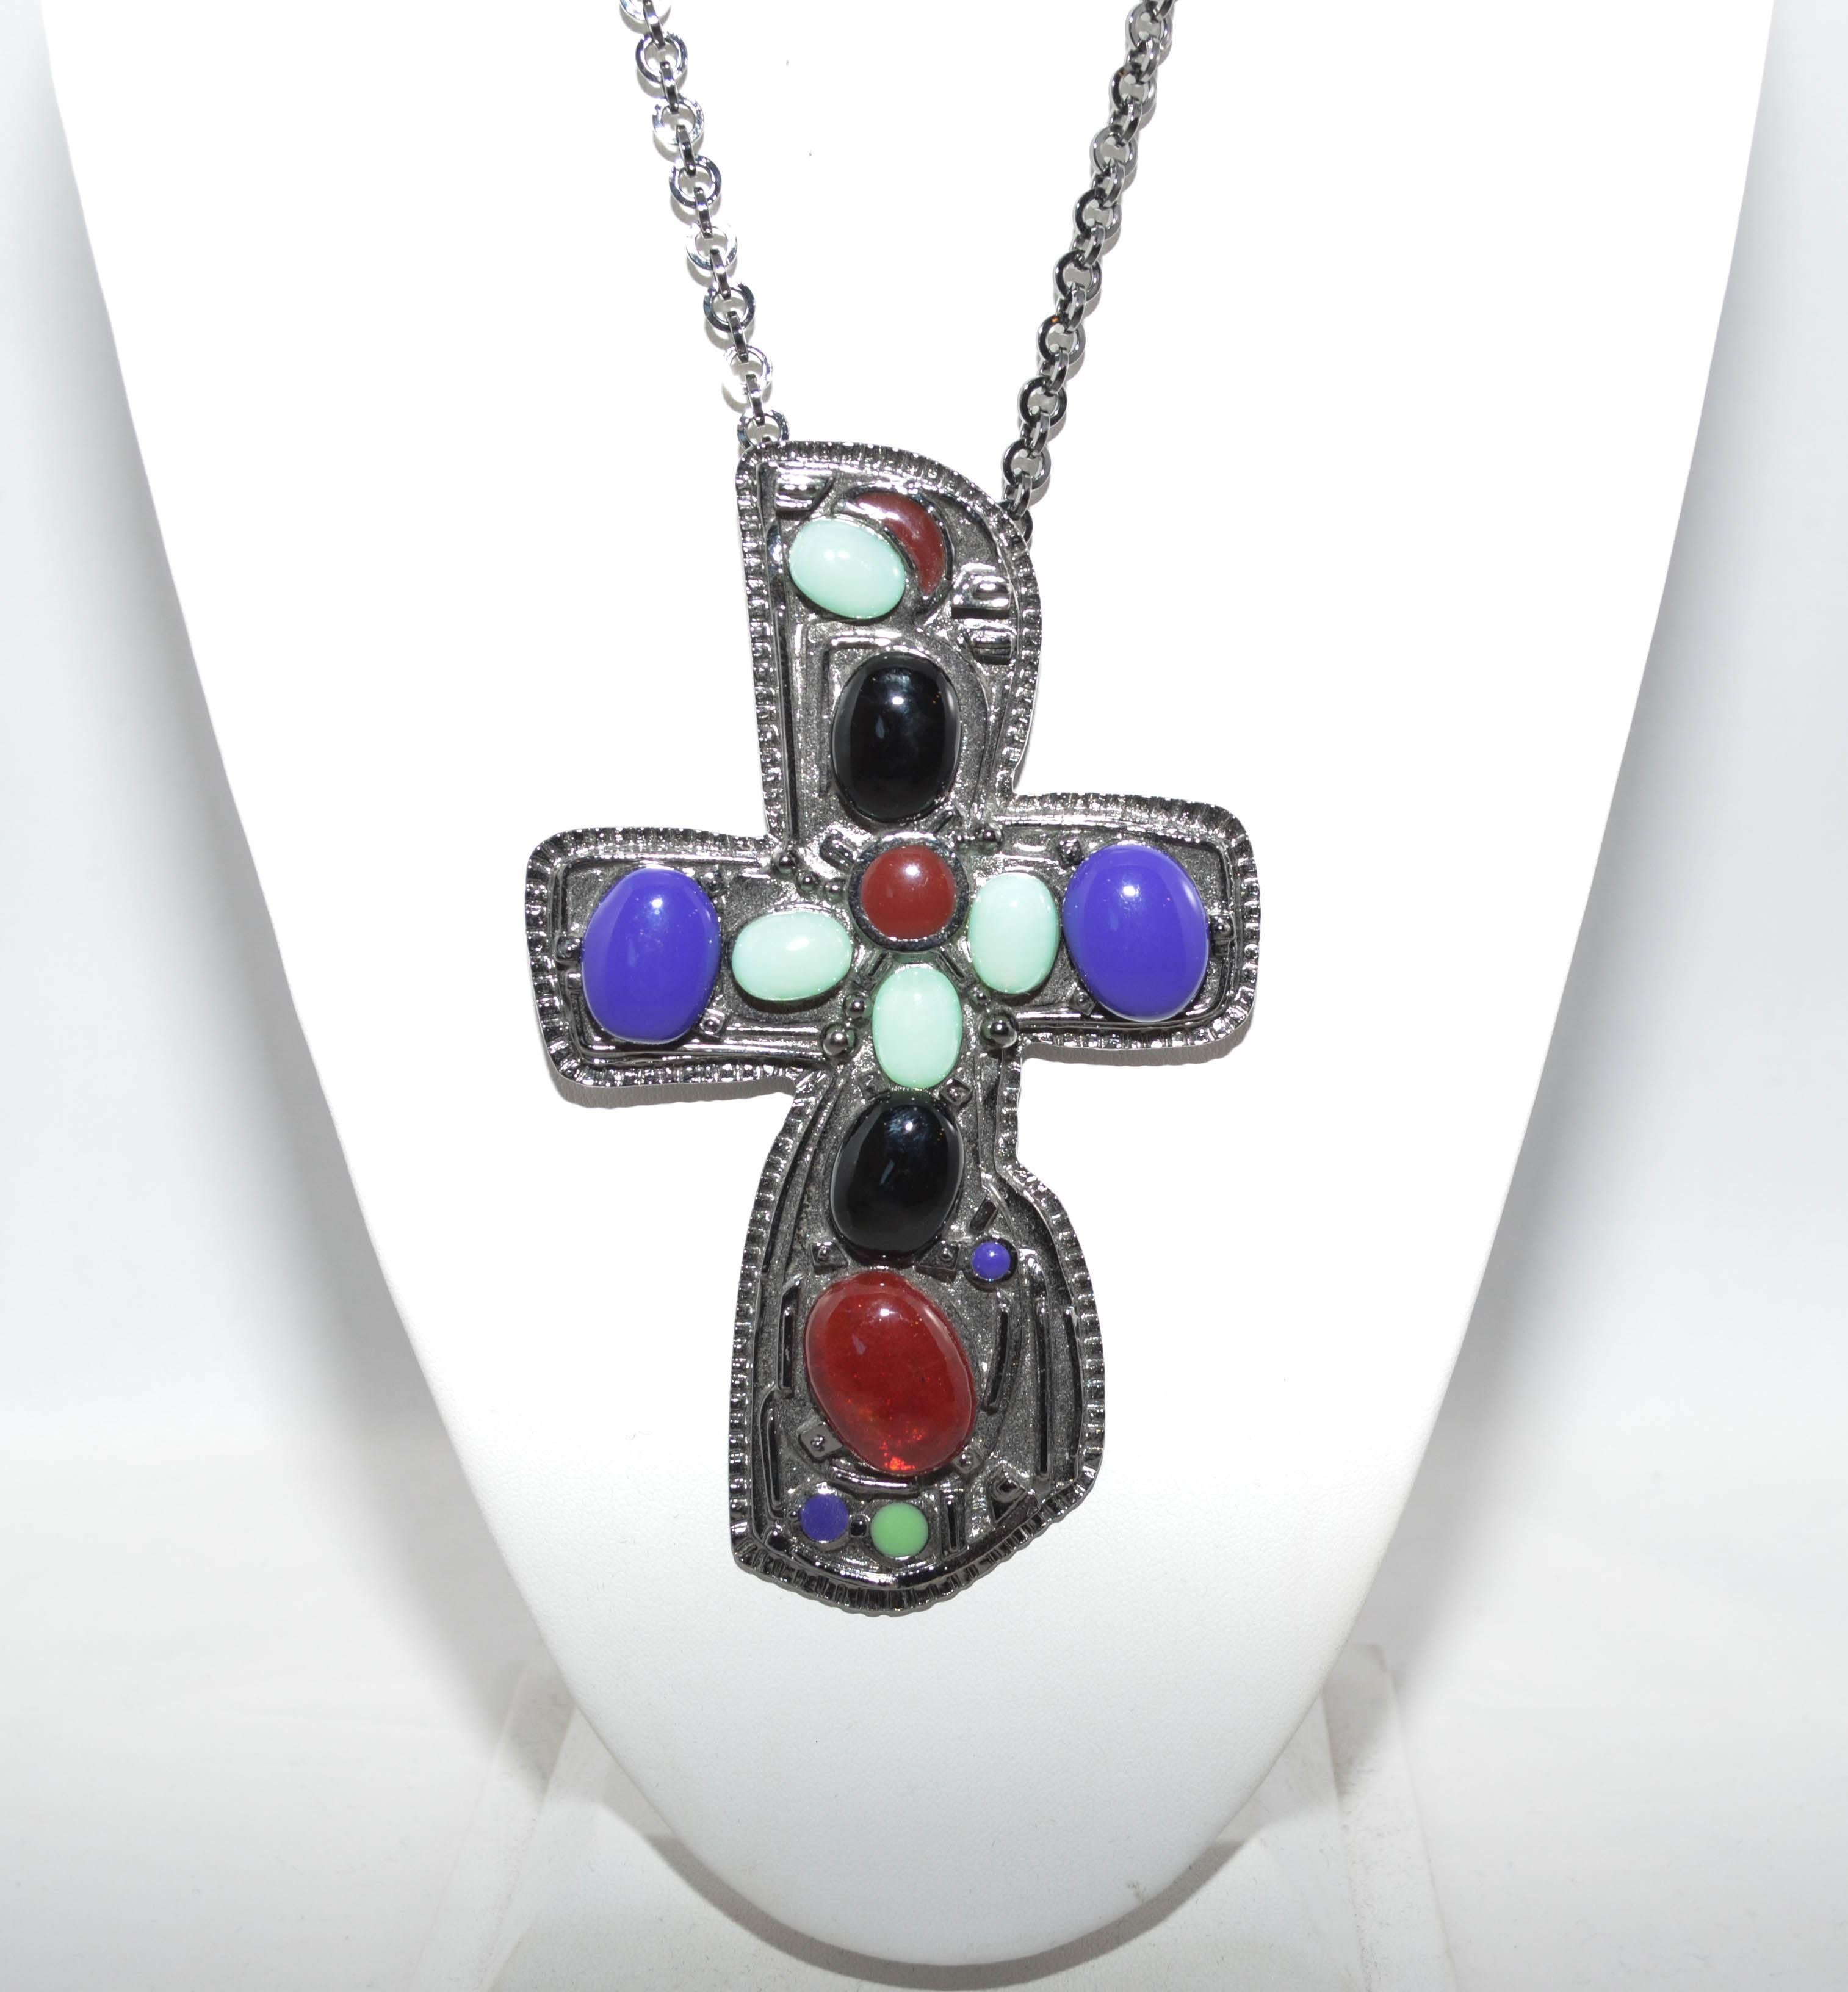 Rare Chanel darkened silver metal cross Gripoix pendant with multicolor glass Gripoix stones in purple, black, mint and maroon. Pendant hangs on darkened silver hardware chain with velvet ties. Plaque reads Chanel 03 A Made in France. From the